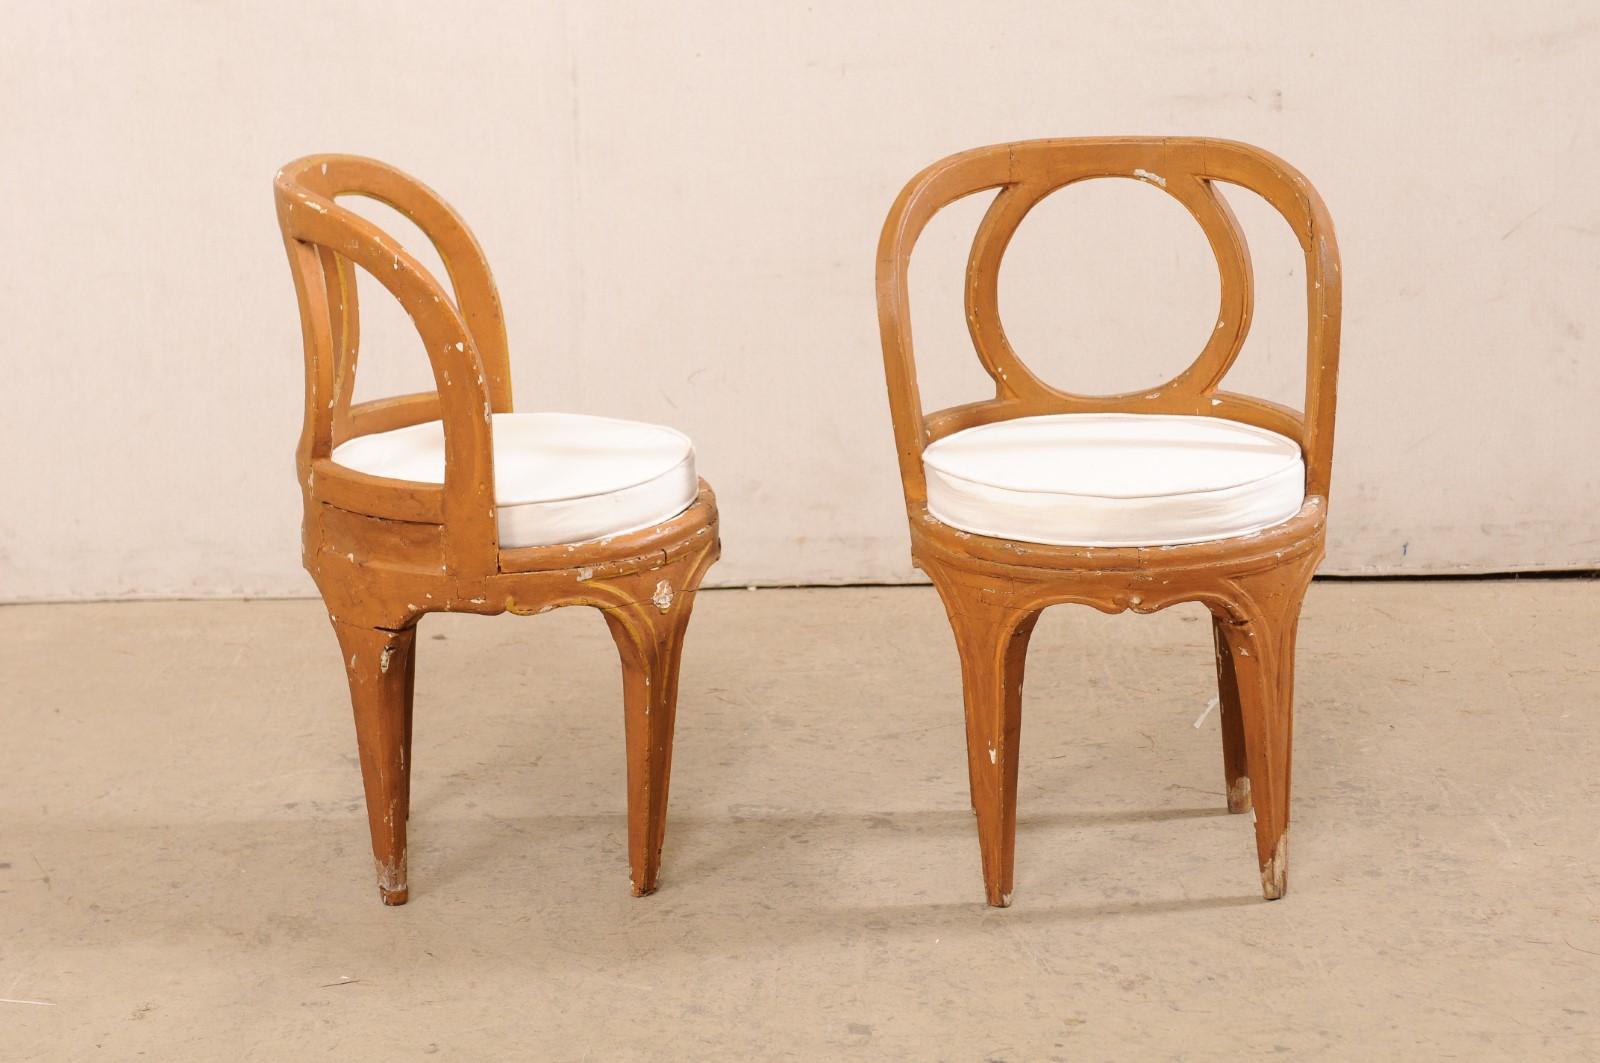 18th Century Pair of Italian Venetian Chairs with New Removable Seat Cushions For Sale 1